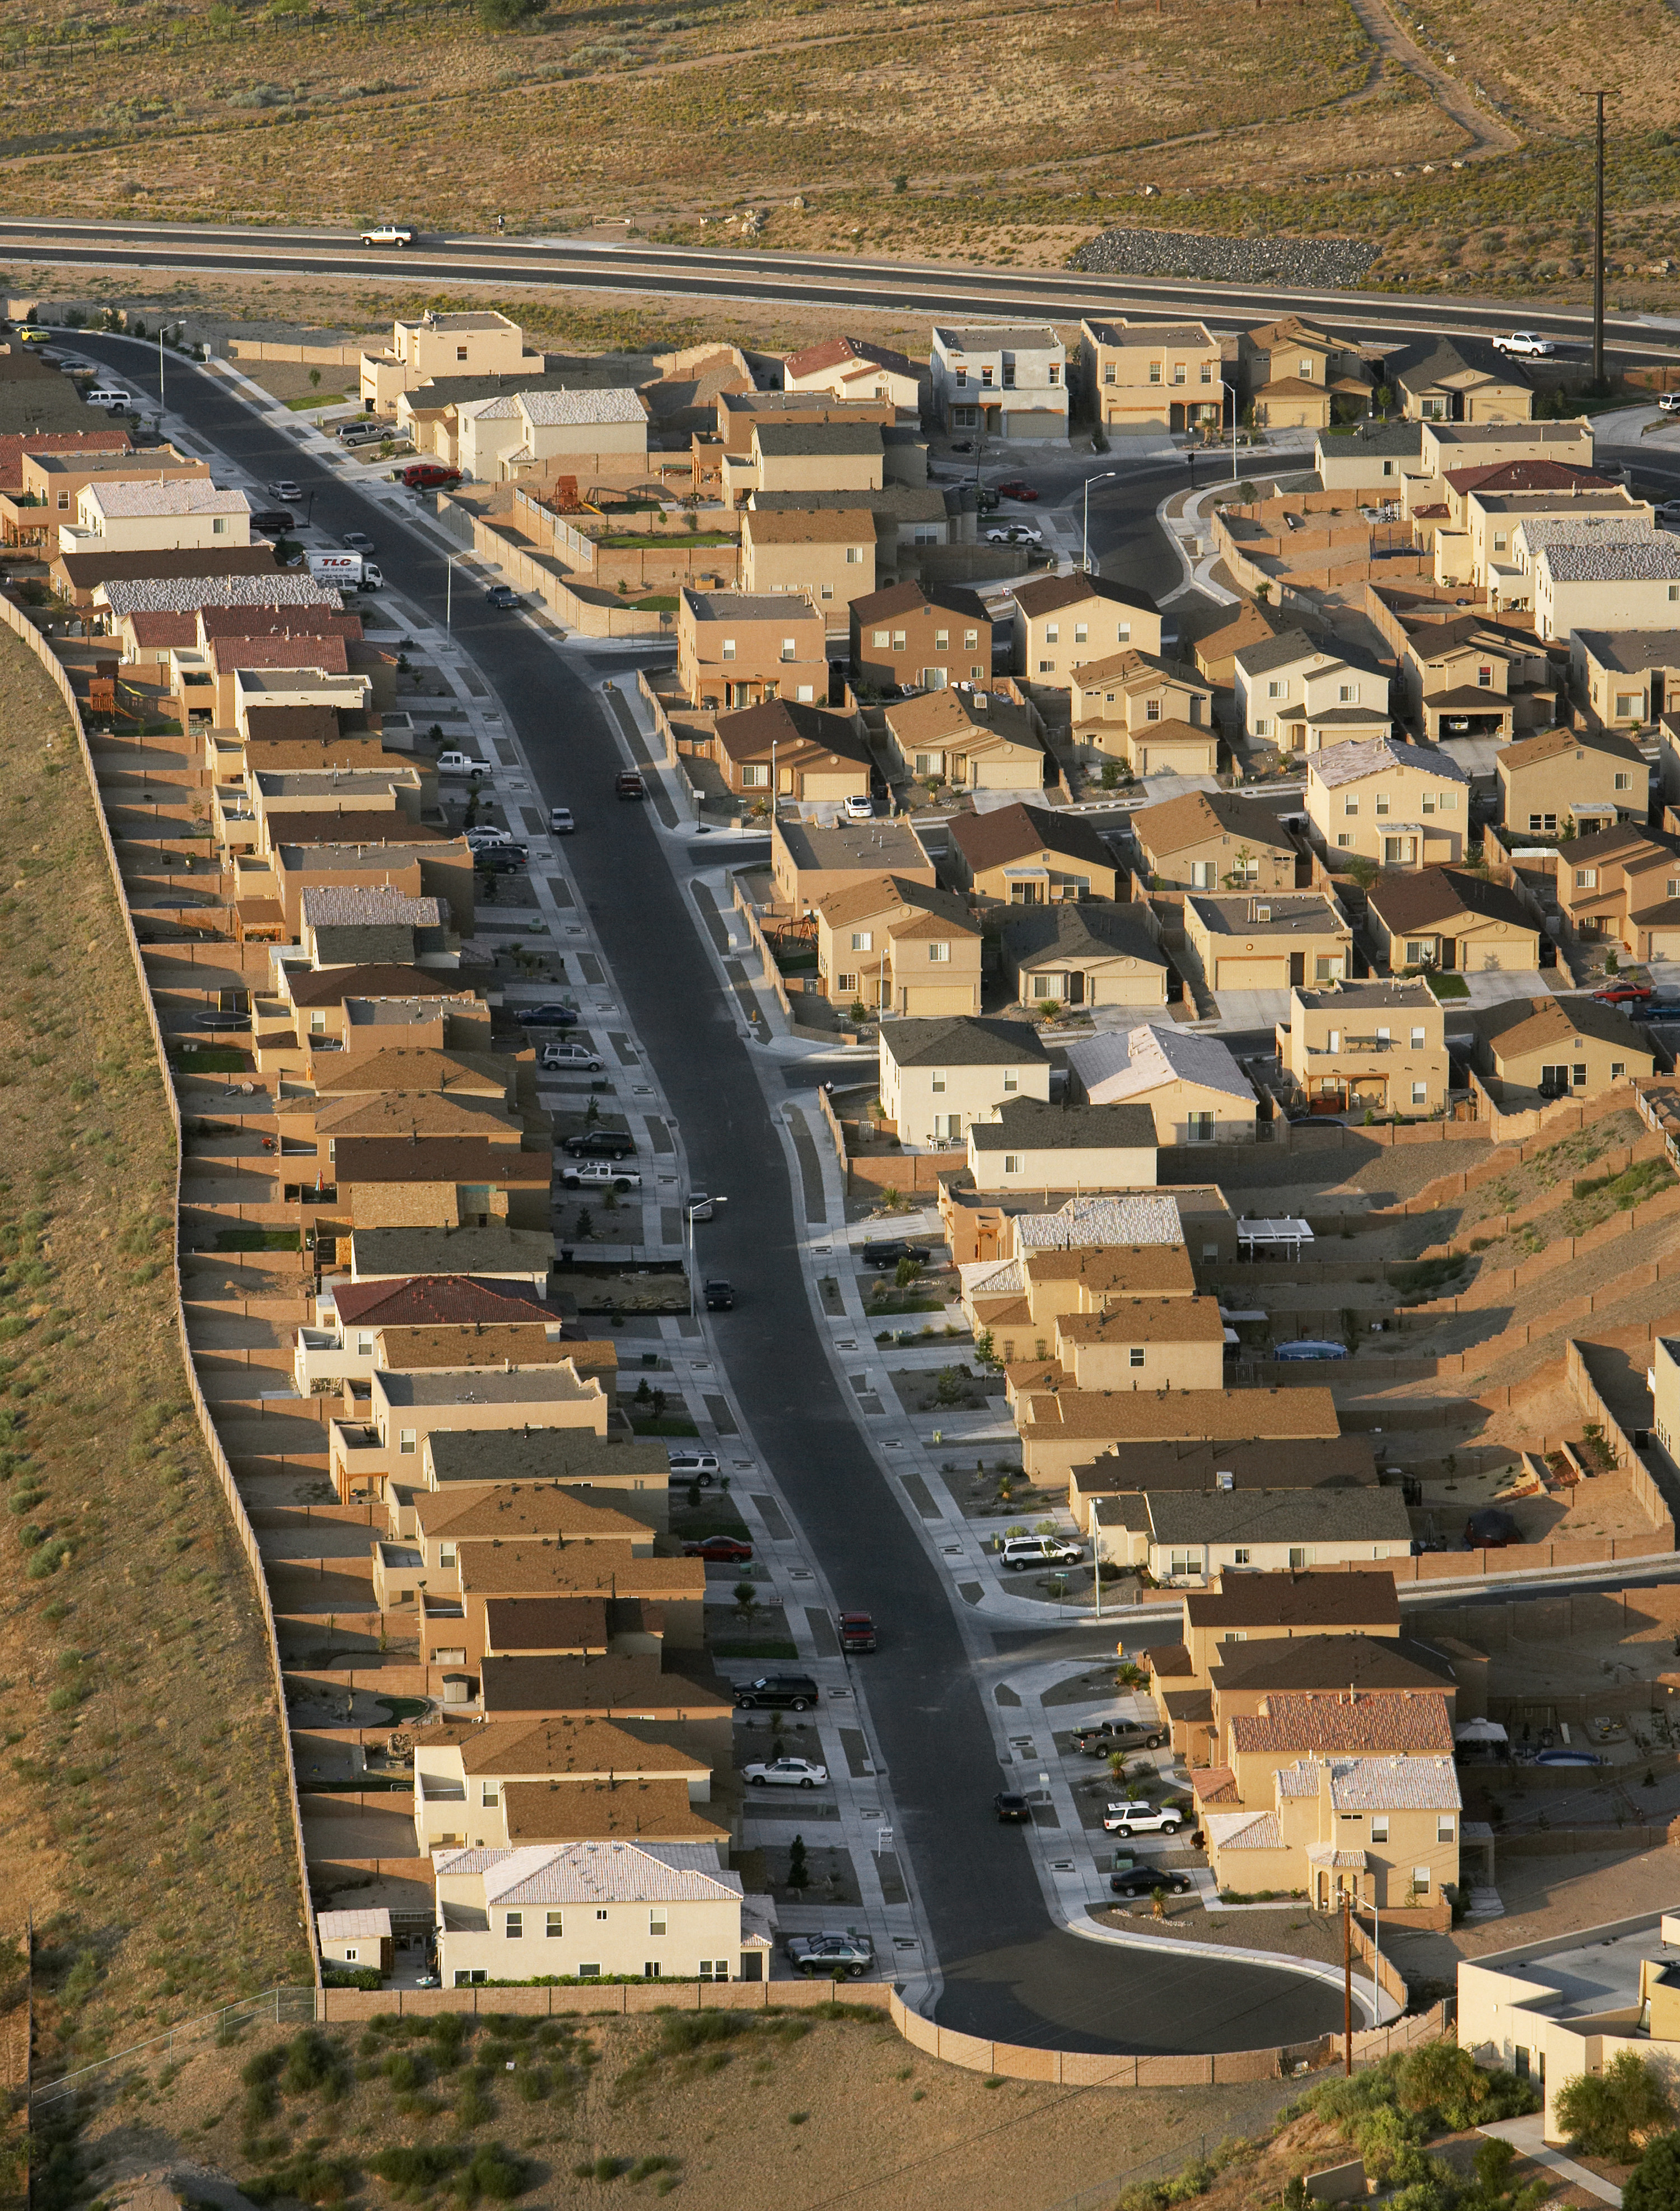 Aerial view of Albuquerque, New Mexico suburban housing neighborhood subdivision and residential streets